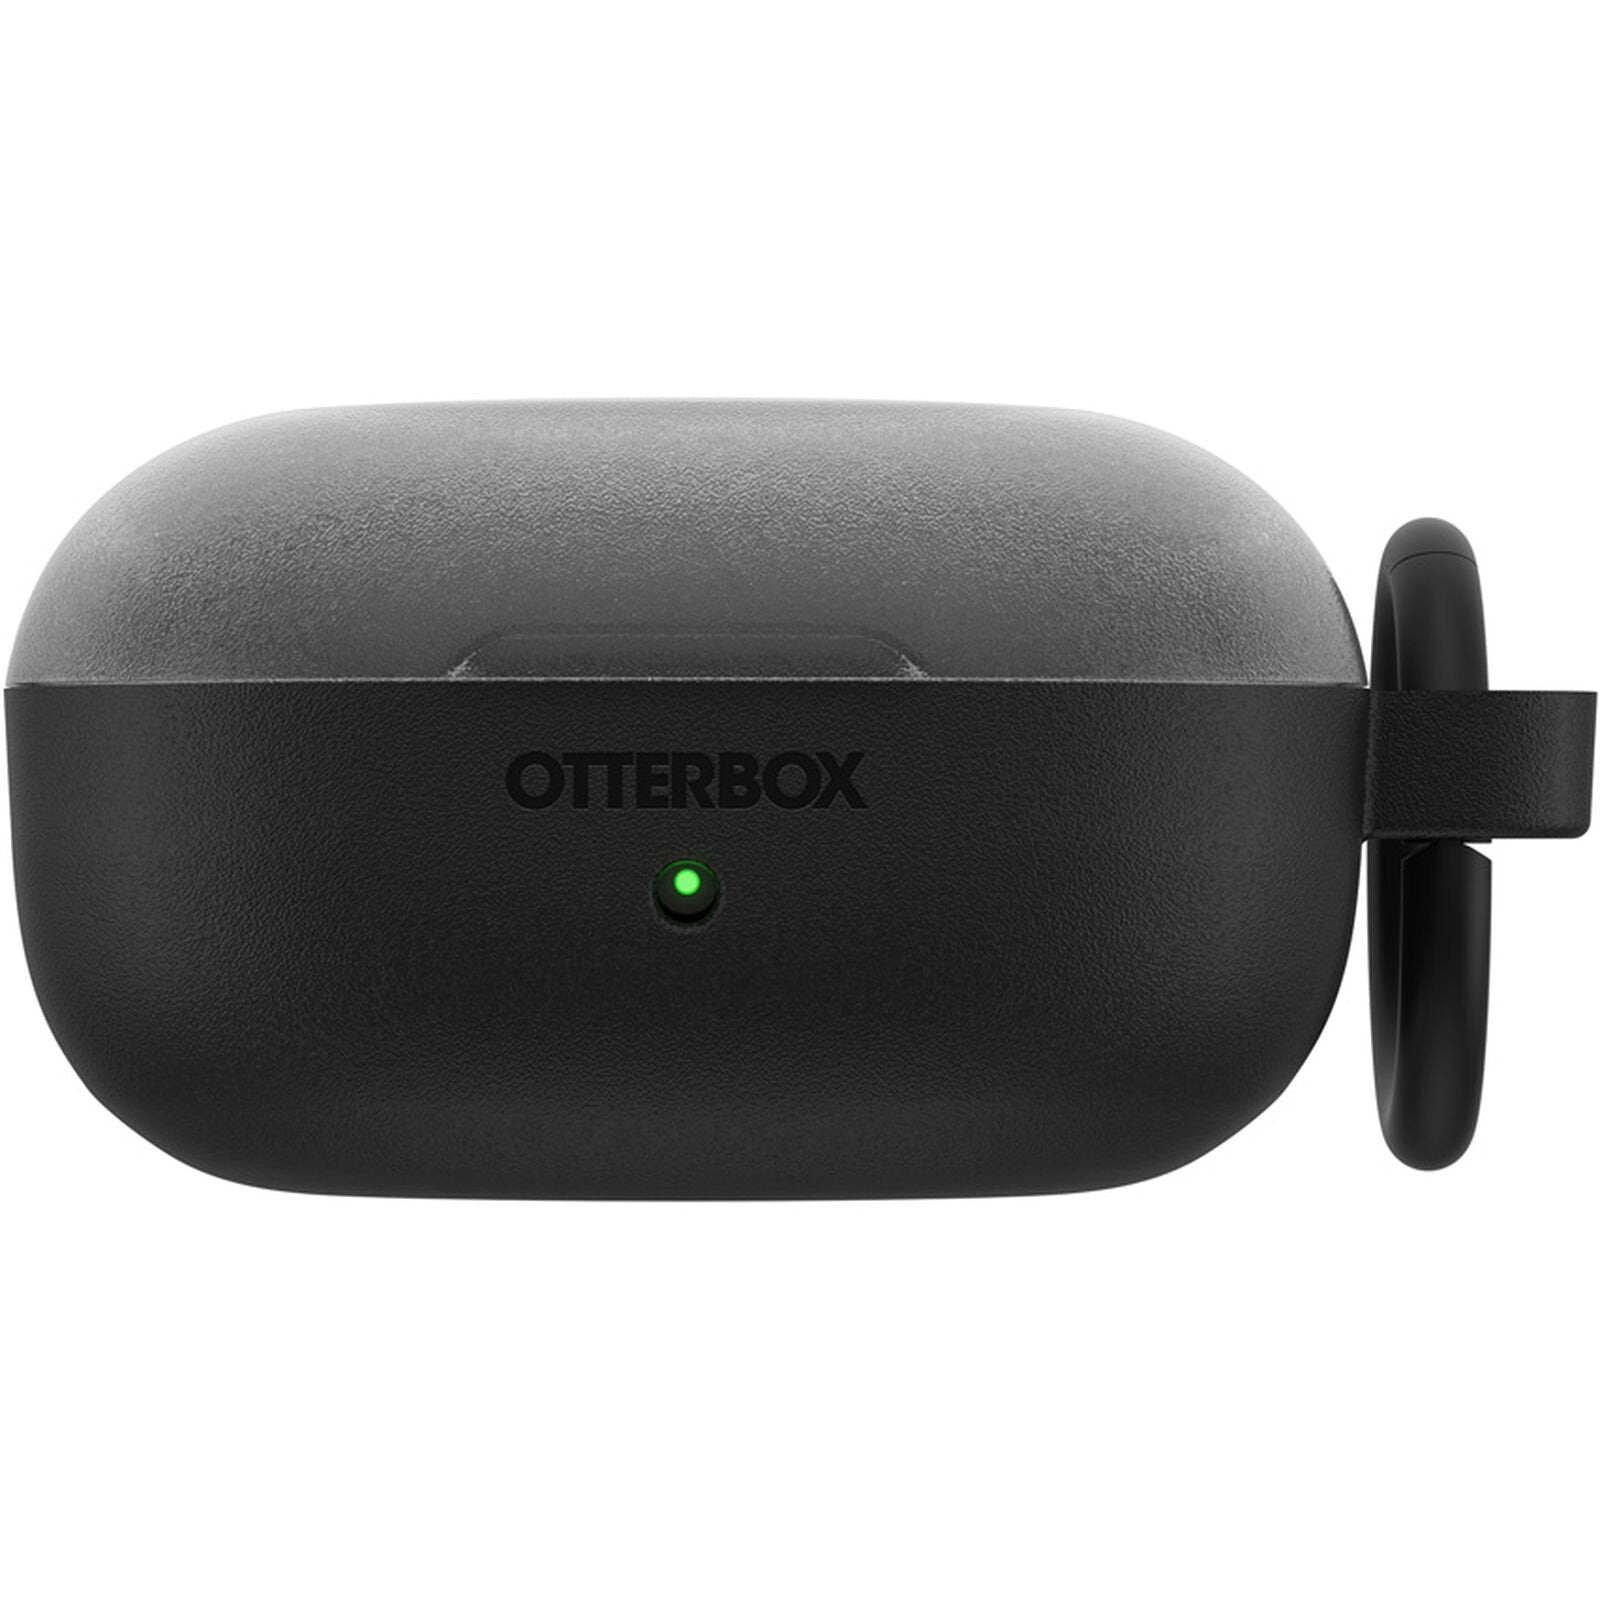 OtterBox Hard Shell Case for Galaxy Buds2 Buds Live &amp; Buds Pro - Black Crystal (New)